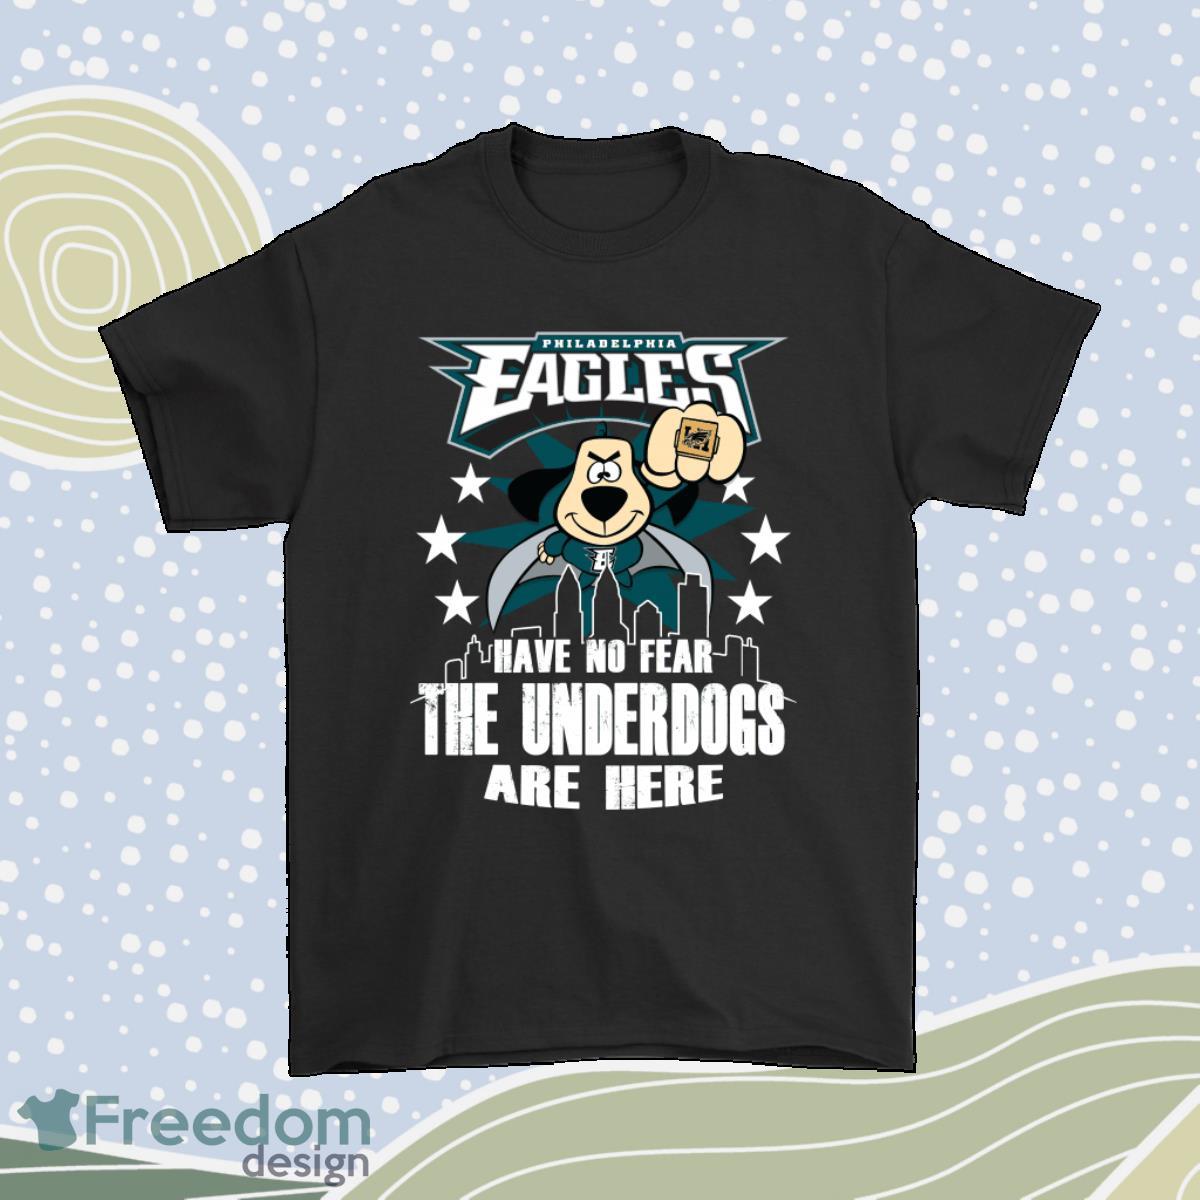 Have No Fear The Underdogs Are Here Philadelphia Eagles Nfl Shirt Product Photo 1